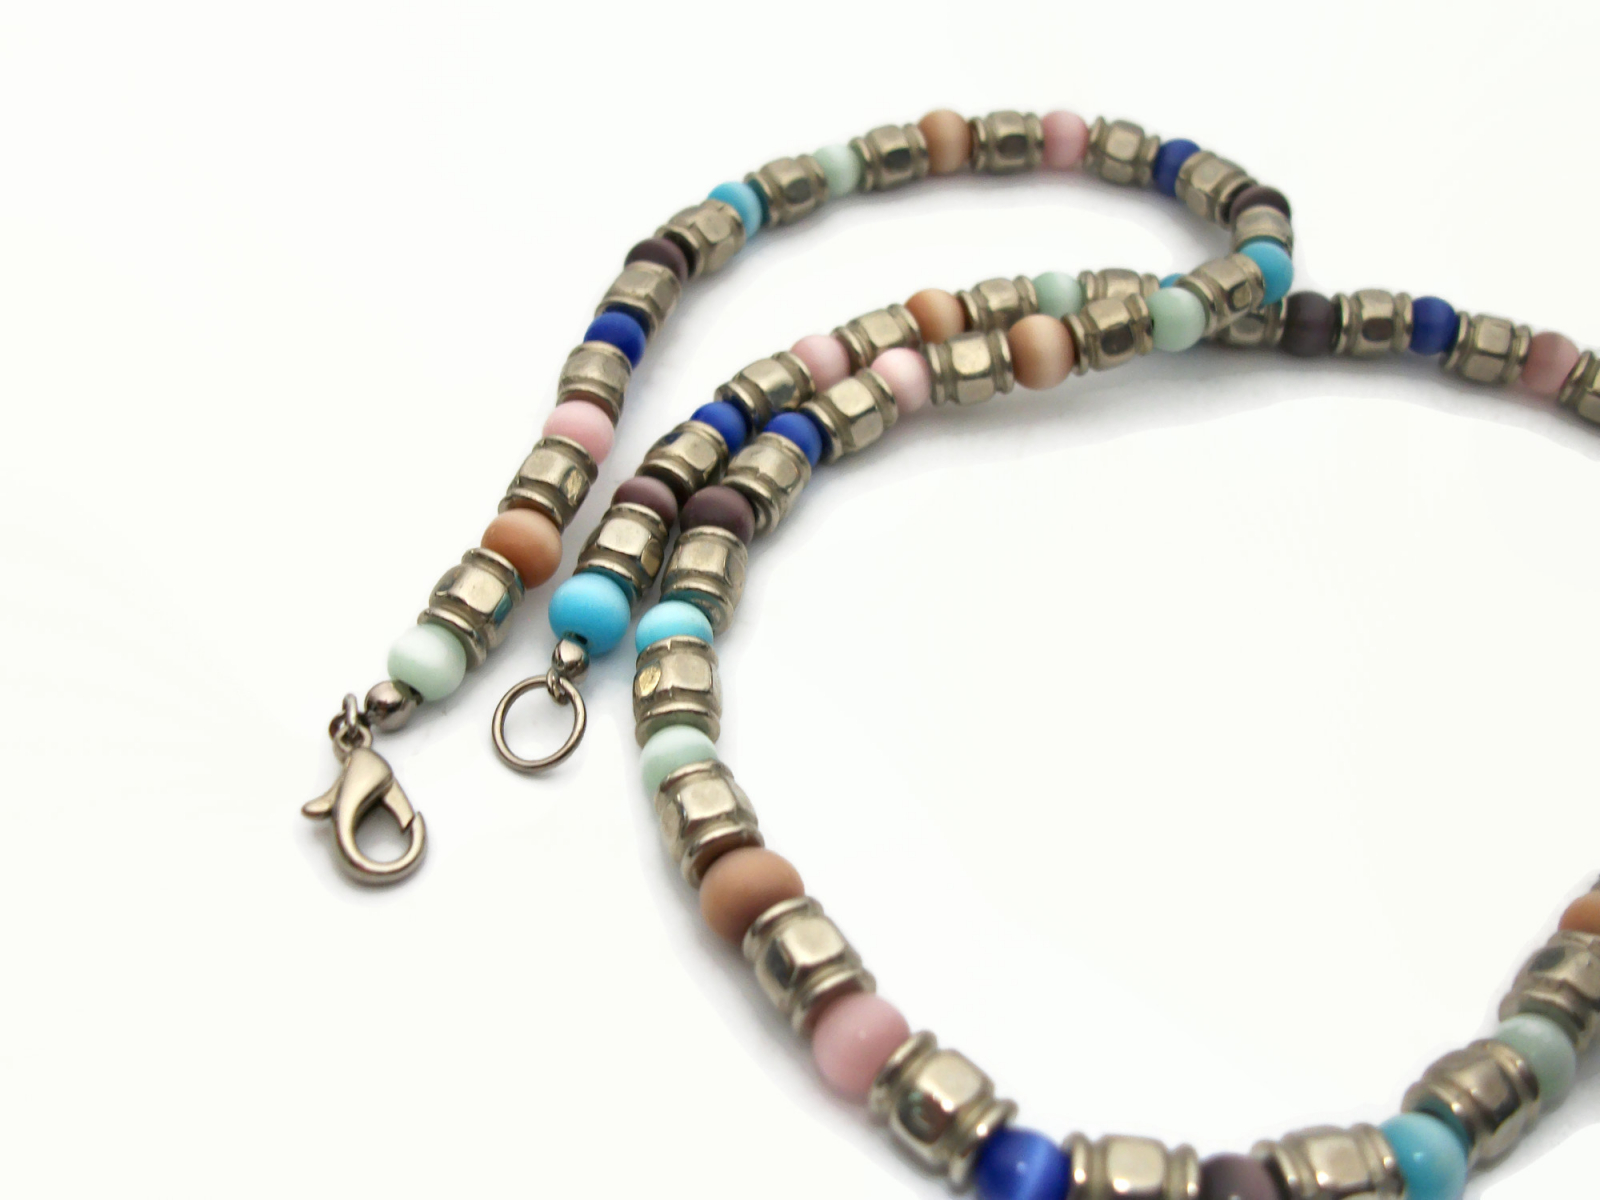 Vintage Cats Eye Beaded Necklace Silver and Multicolored Catseye Beads ...